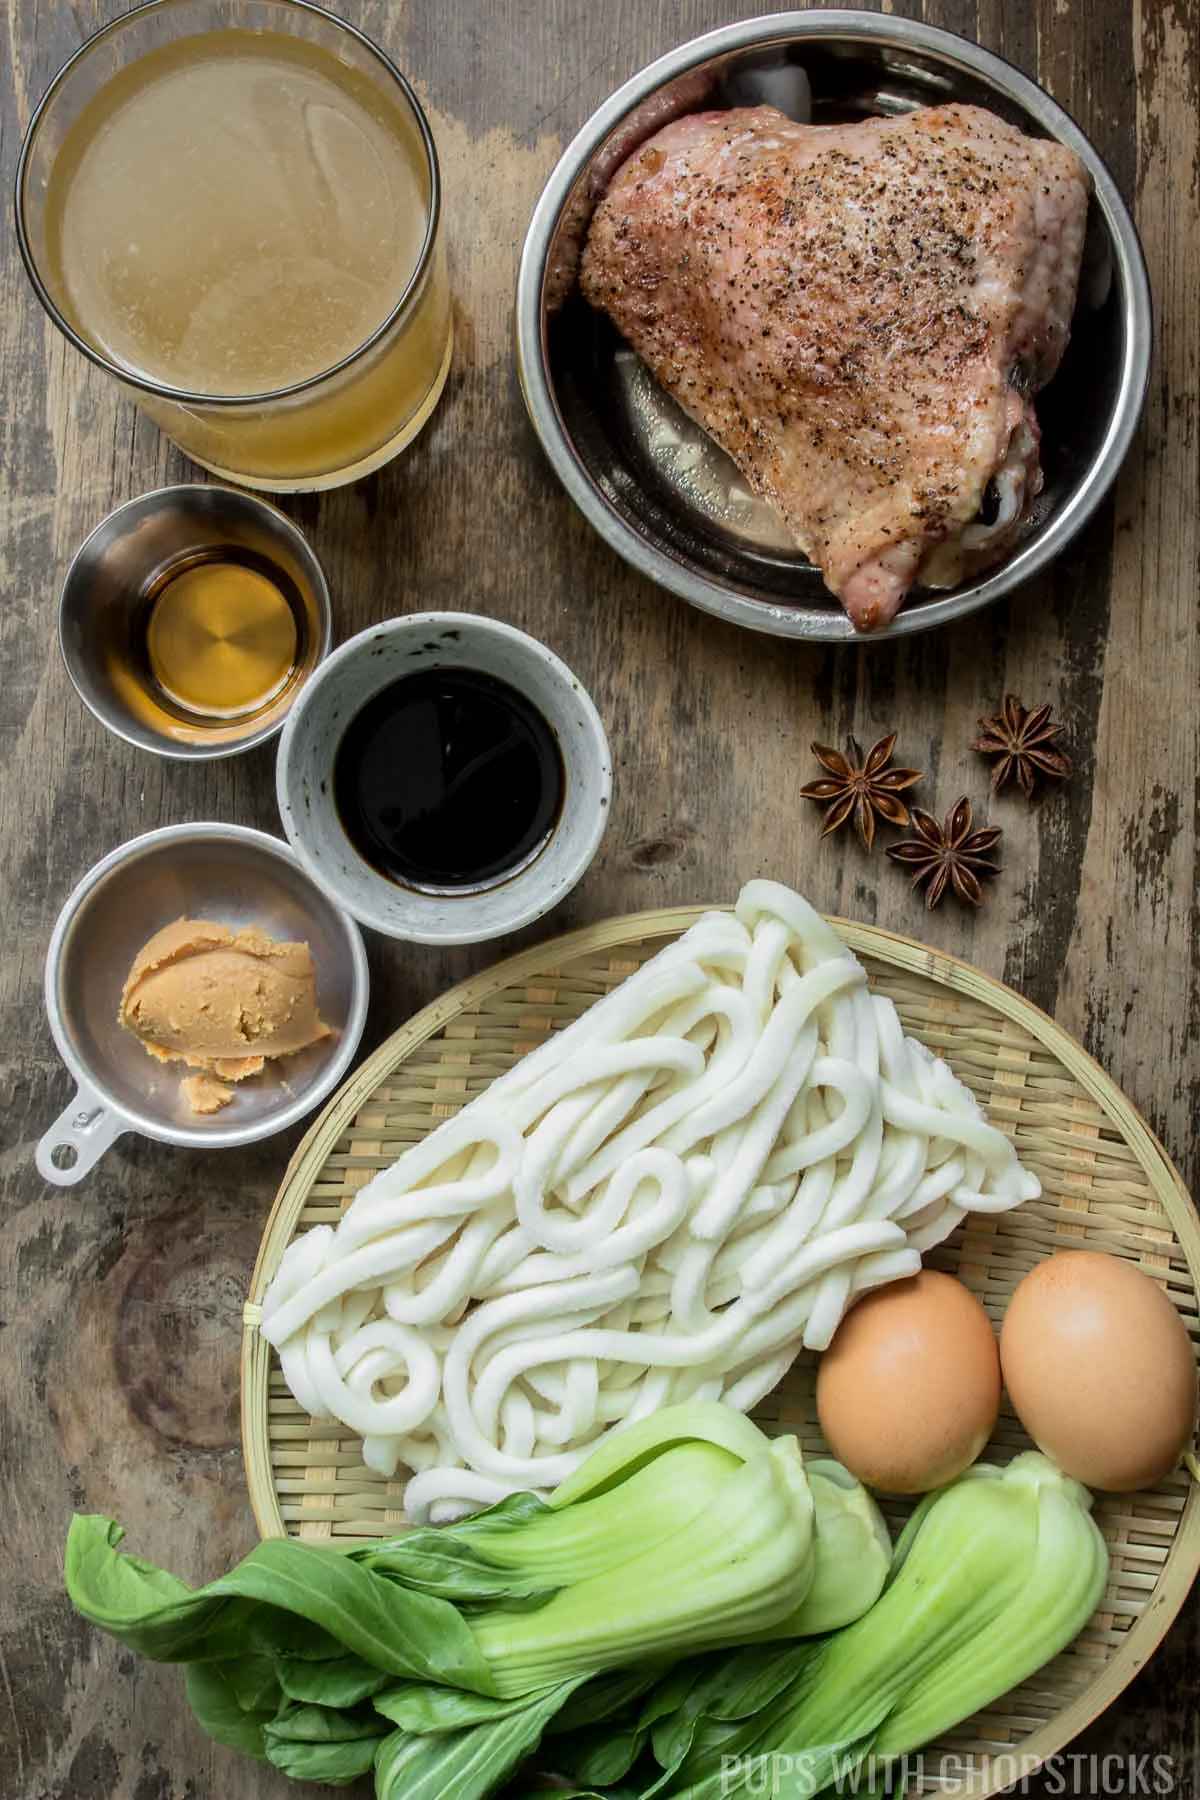 Ingredients for Udon Noodle Soup (udon noodles, eggs, boy choy, miso, soy sauce, broth, star anise, turkey, sesame oil)